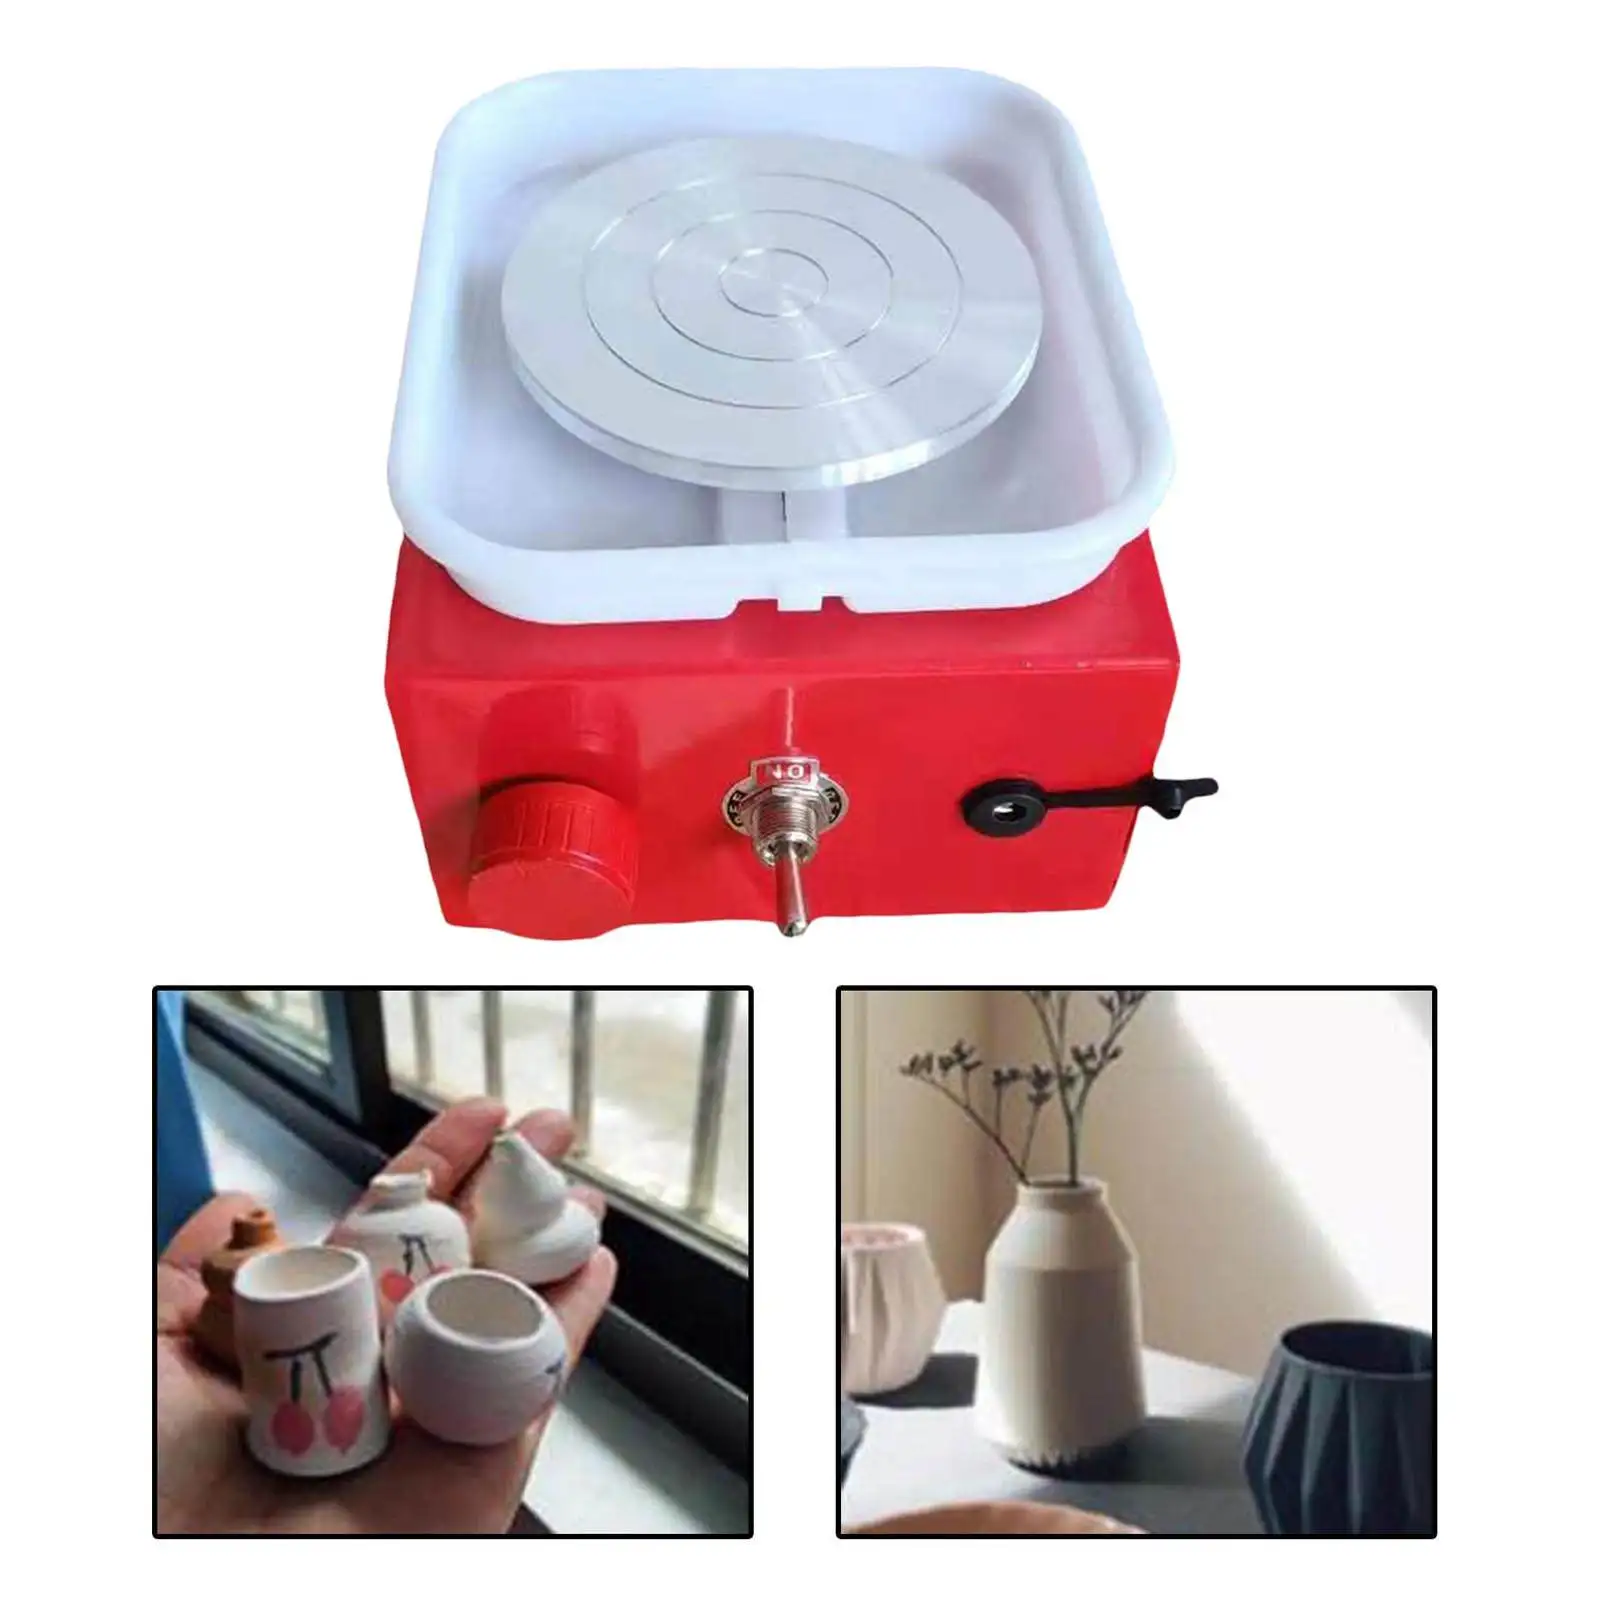 Electric Pottery Wheel Mini Clay Forming Art Craft Ceramic Trimming Wheel US Plug Tool Machine for School Teaching Kids Home Use